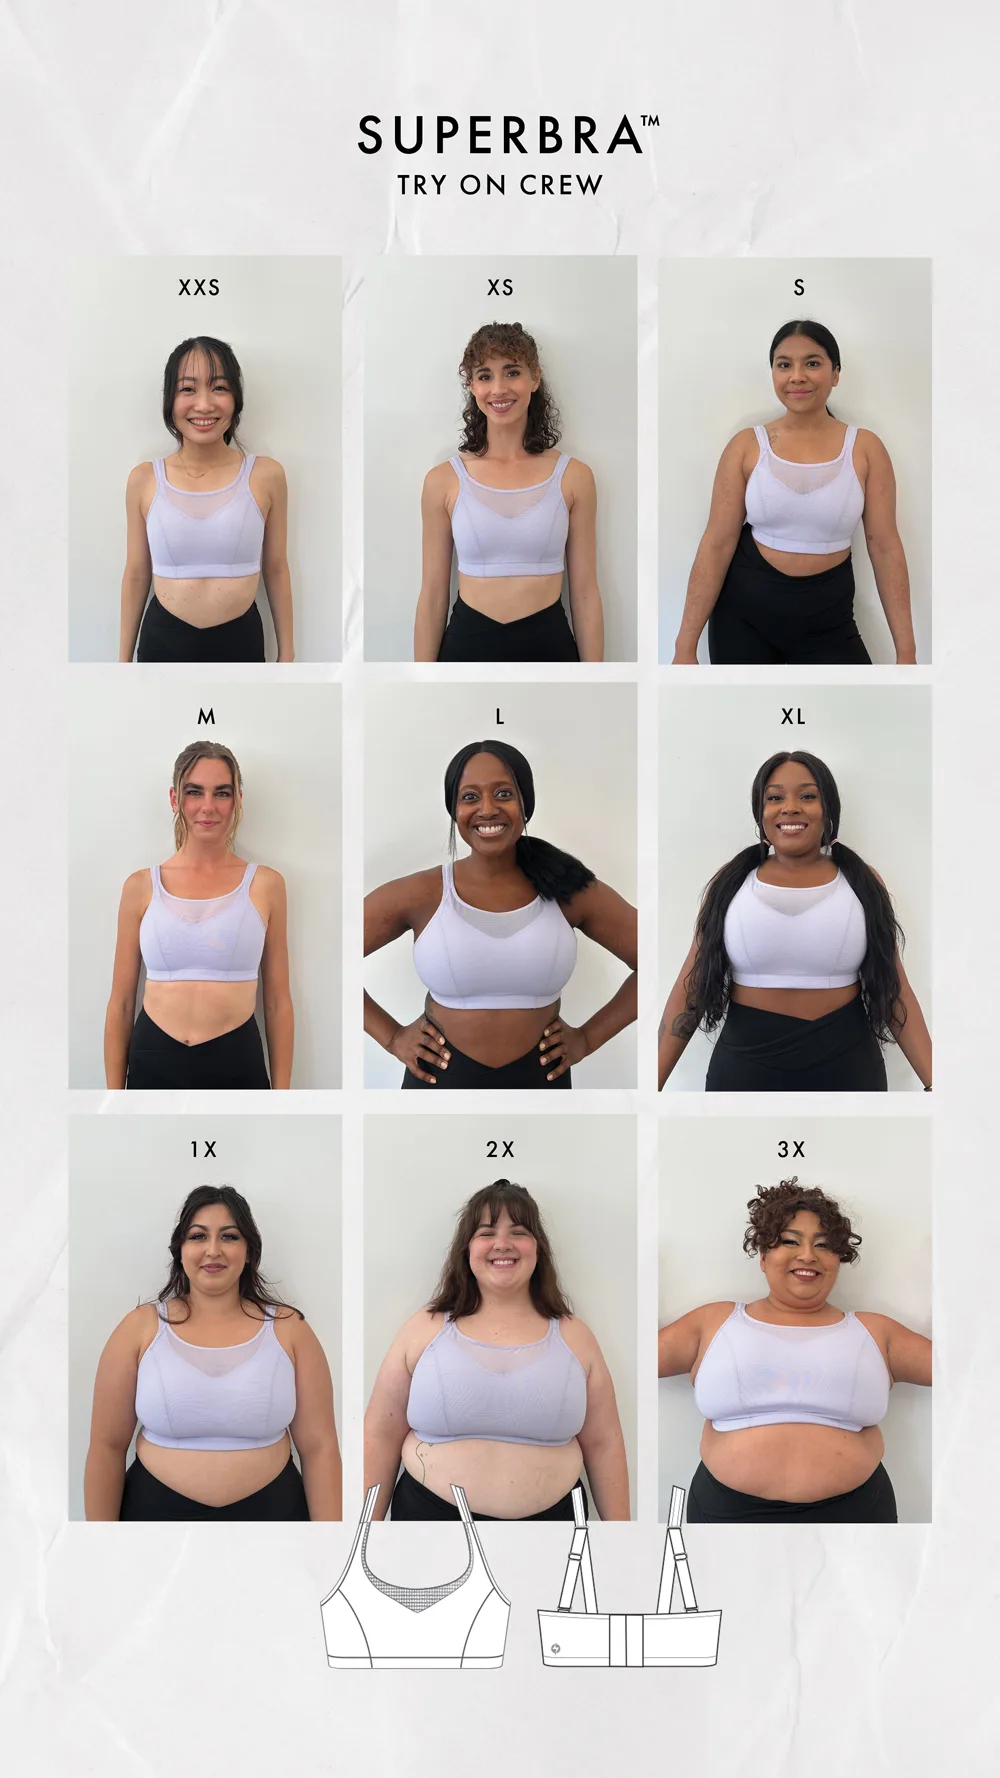 Back in 2021, we gave you guys an “Ultimate Bra Survey”, asking you to help  us design the best fitting and most supportive sports bra